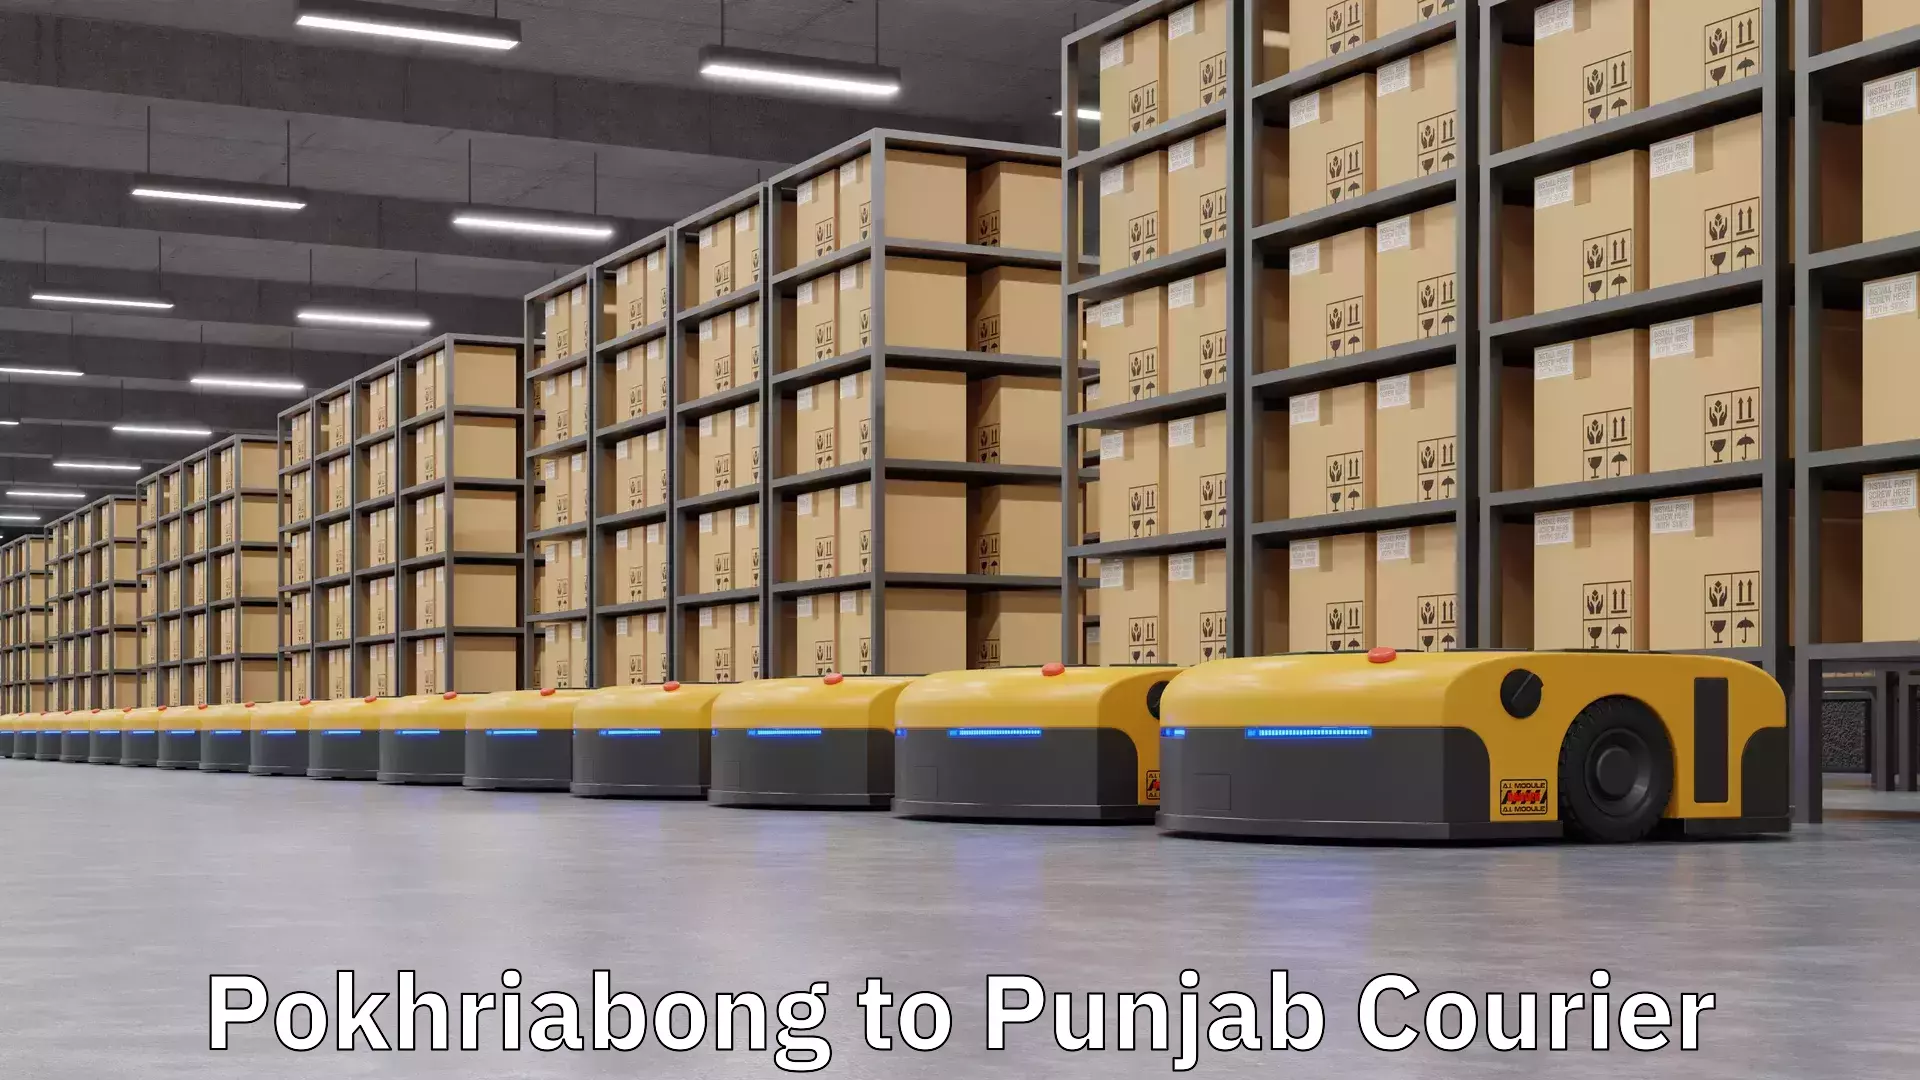 Next day courier Pokhriabong to Punjab